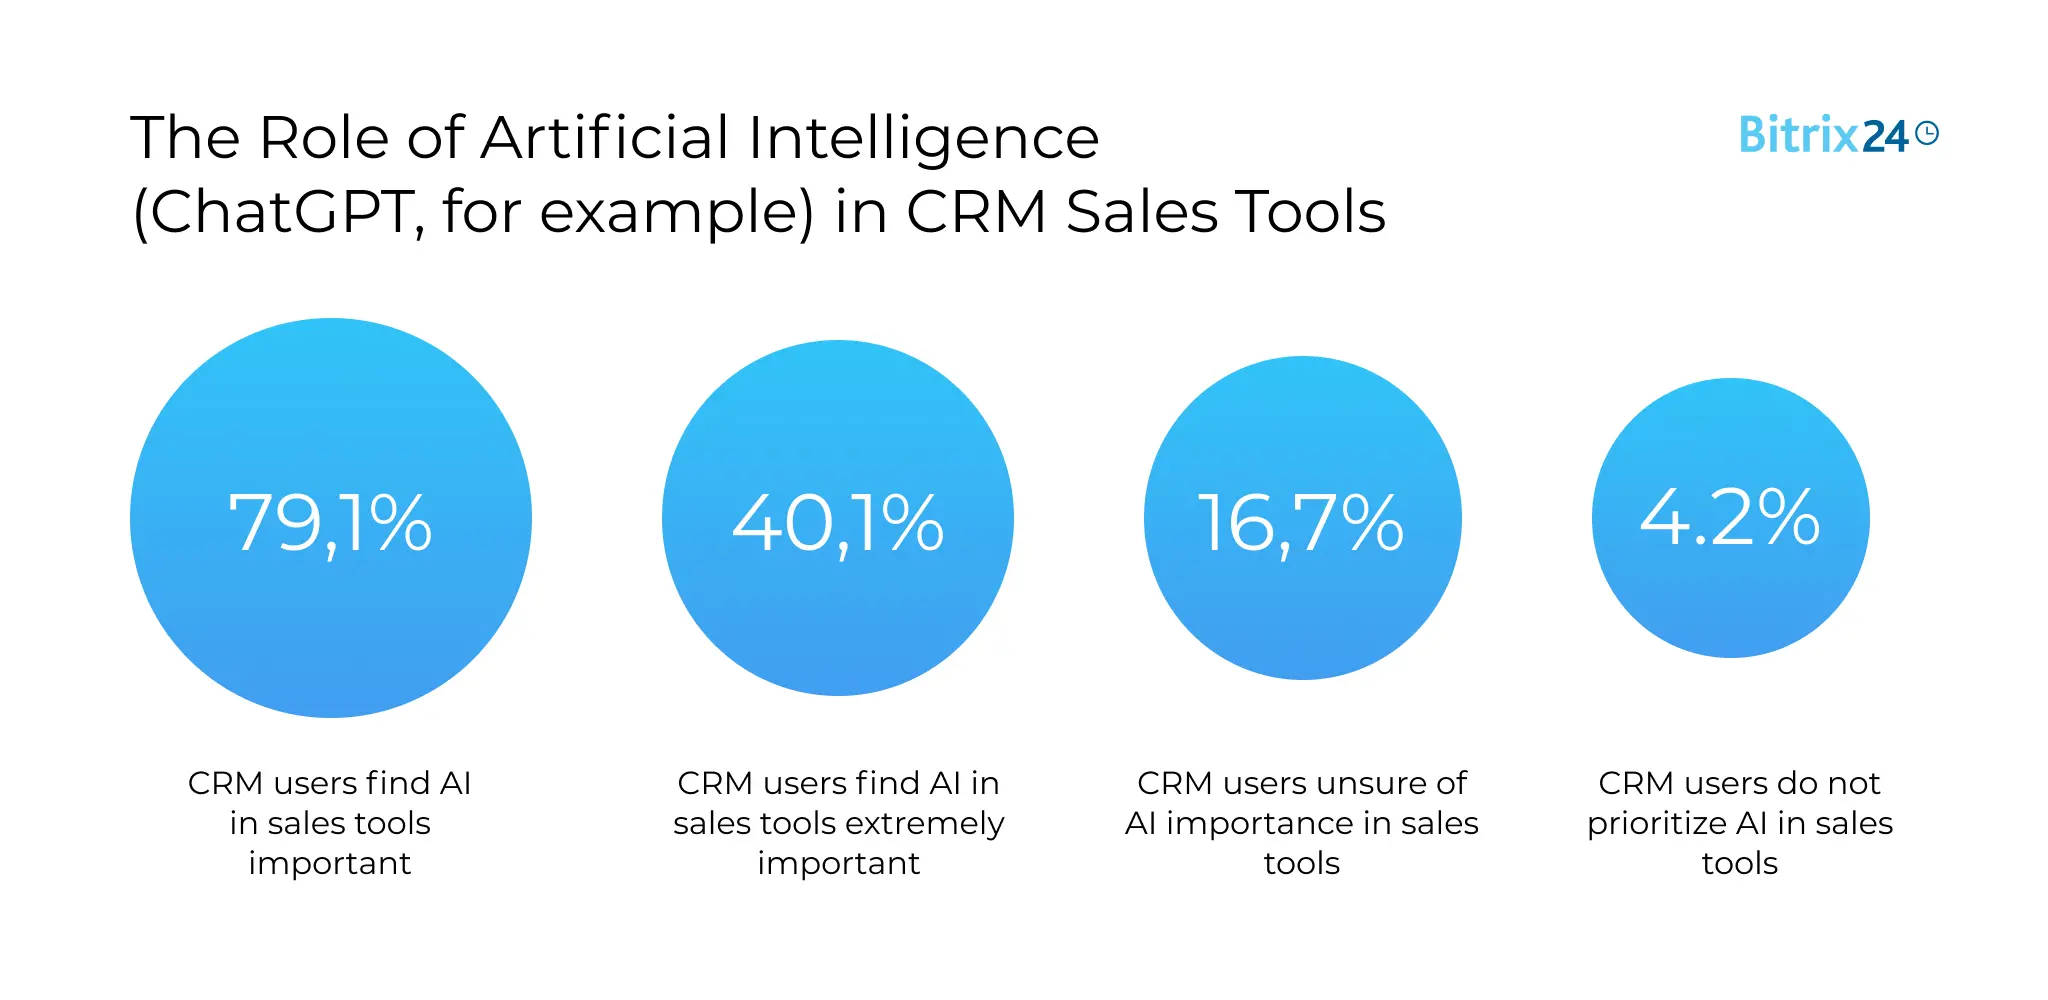 The Role of Artificial Intelligence (ChatGPT, for example) in CRM Sales Tools